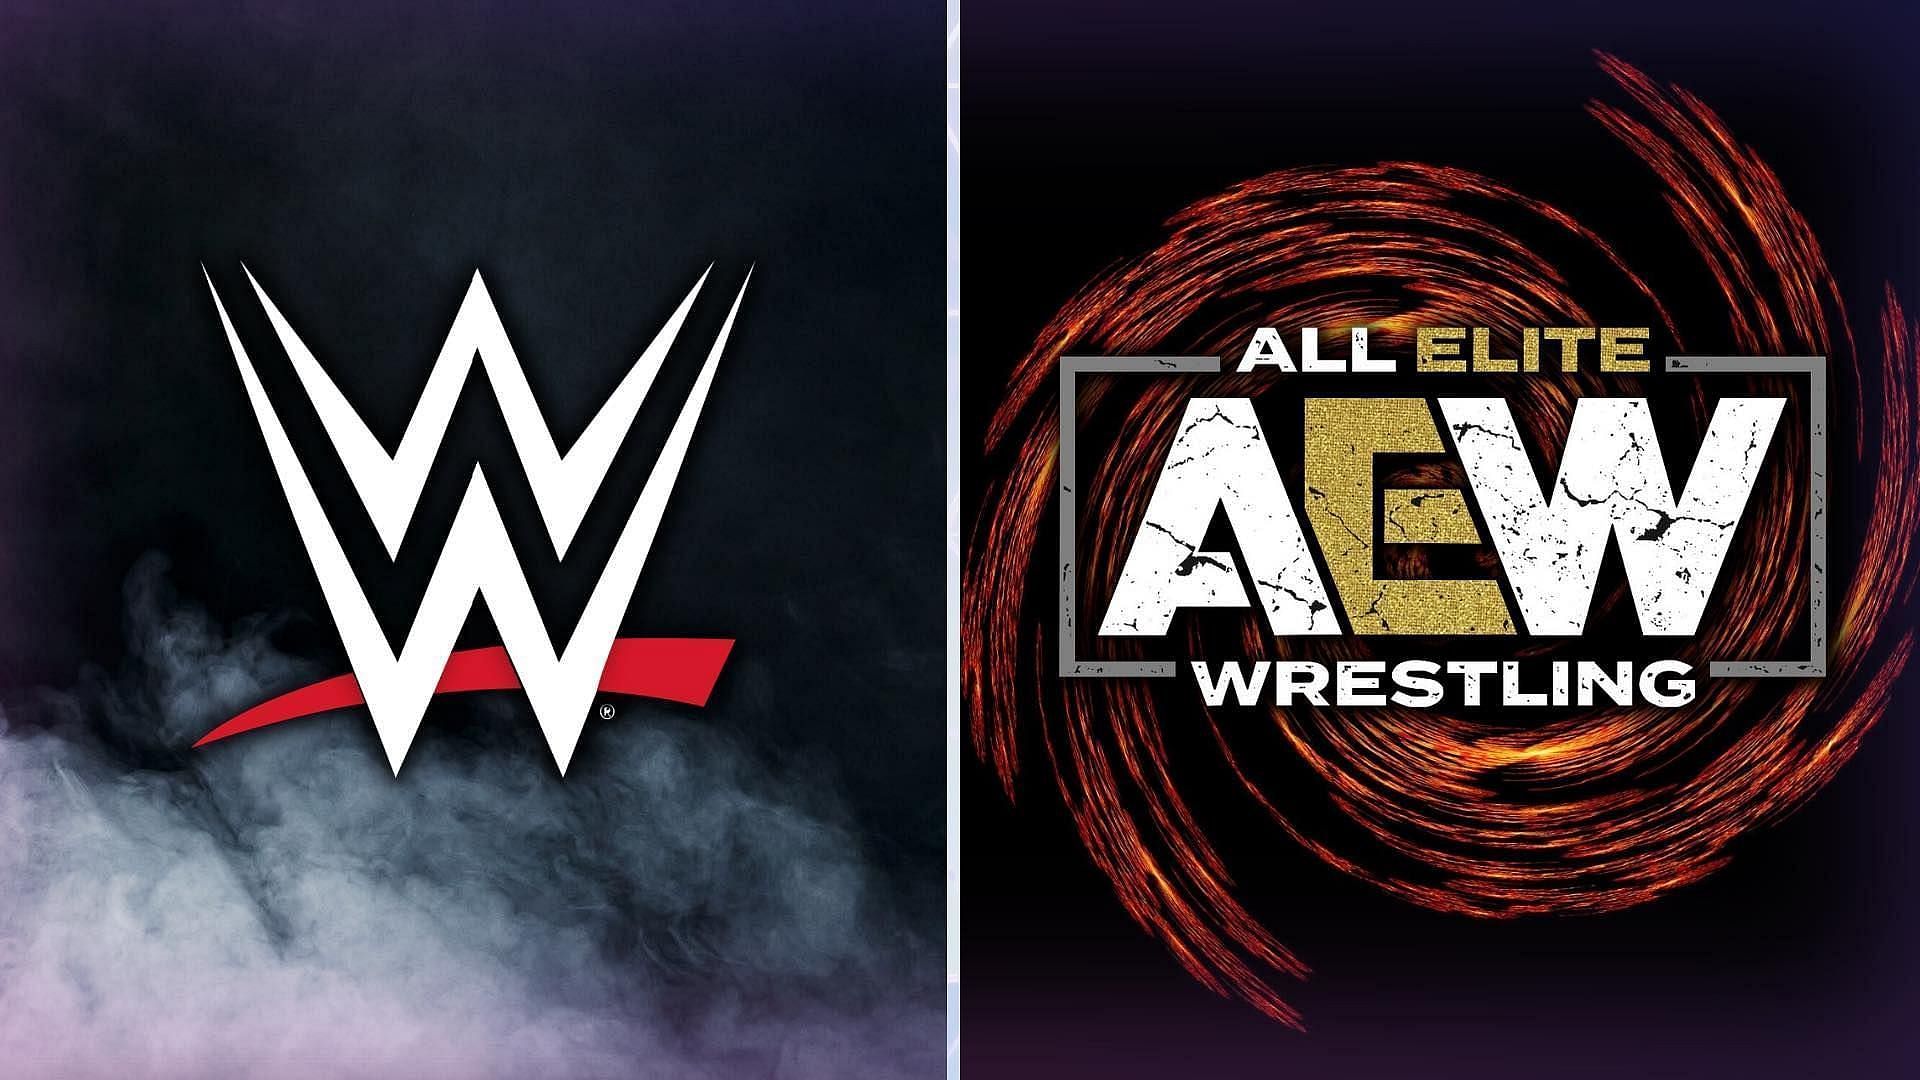 WWE and AEW are set to go head-to-head again